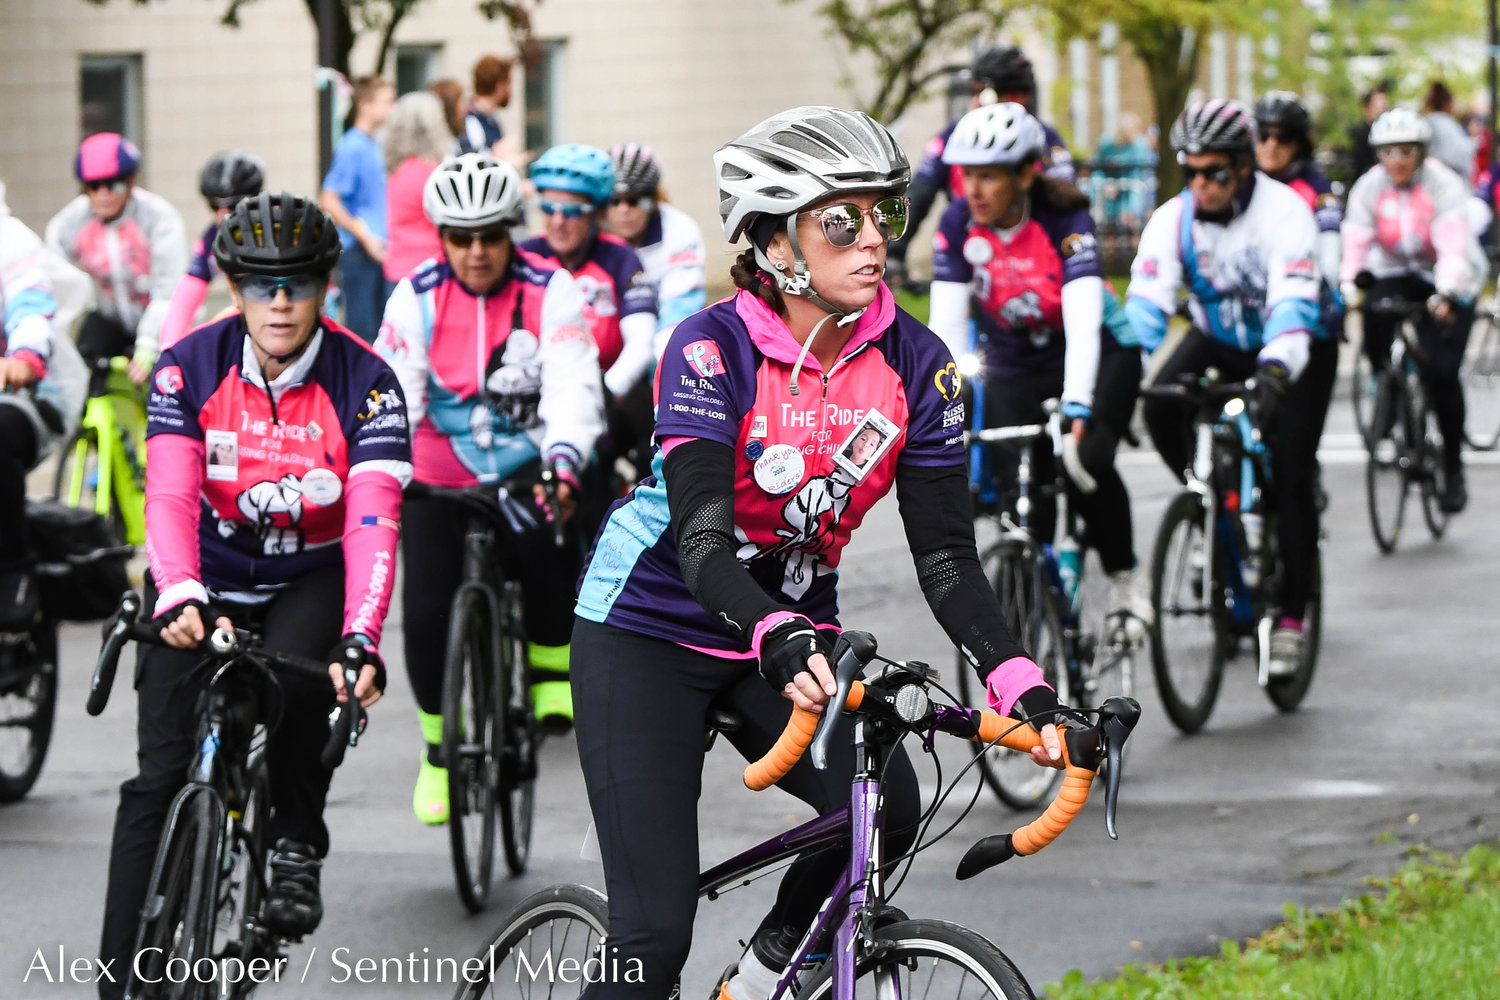 Riders start their route after a short break during the 24th annual Ride For Missing Children on Wednesday, Sept. 28 outside of Gregory B. Jarvis Middle School in Mohawk.